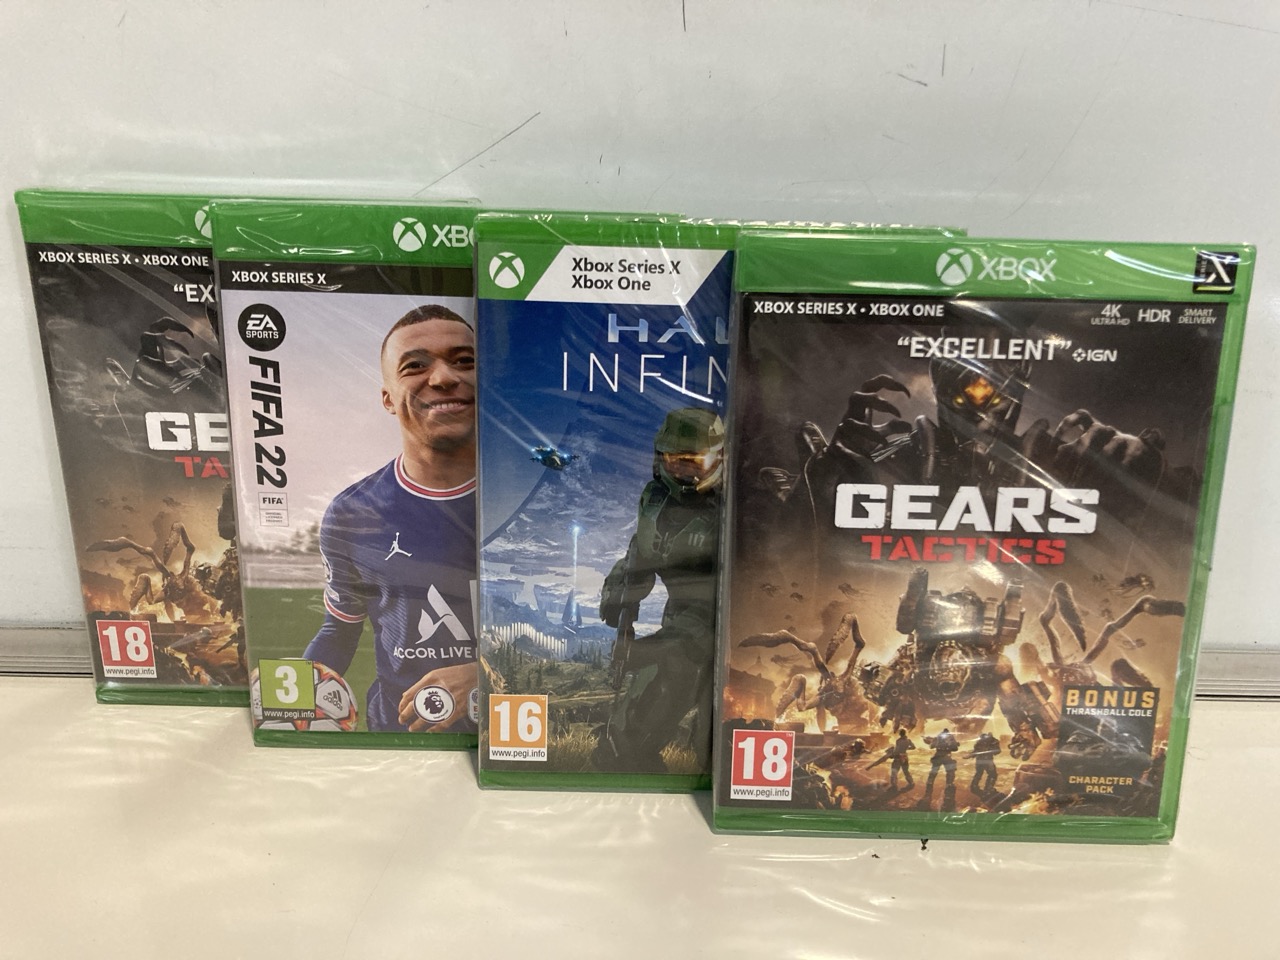 4 X XBOX GAMES, SERIES X & XBOX ONE, HALO INFINITE TOGETHER WITH FIFA 2022 (18 + ID MAY BE REQUIRED)